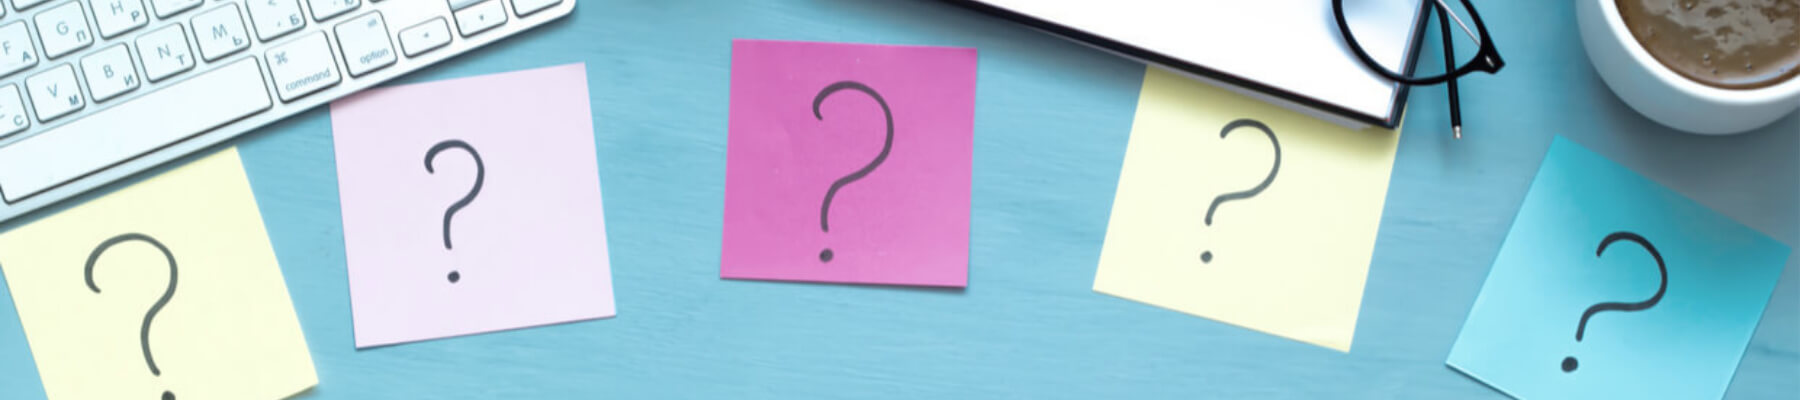 top 5 question with post it notes and desktop